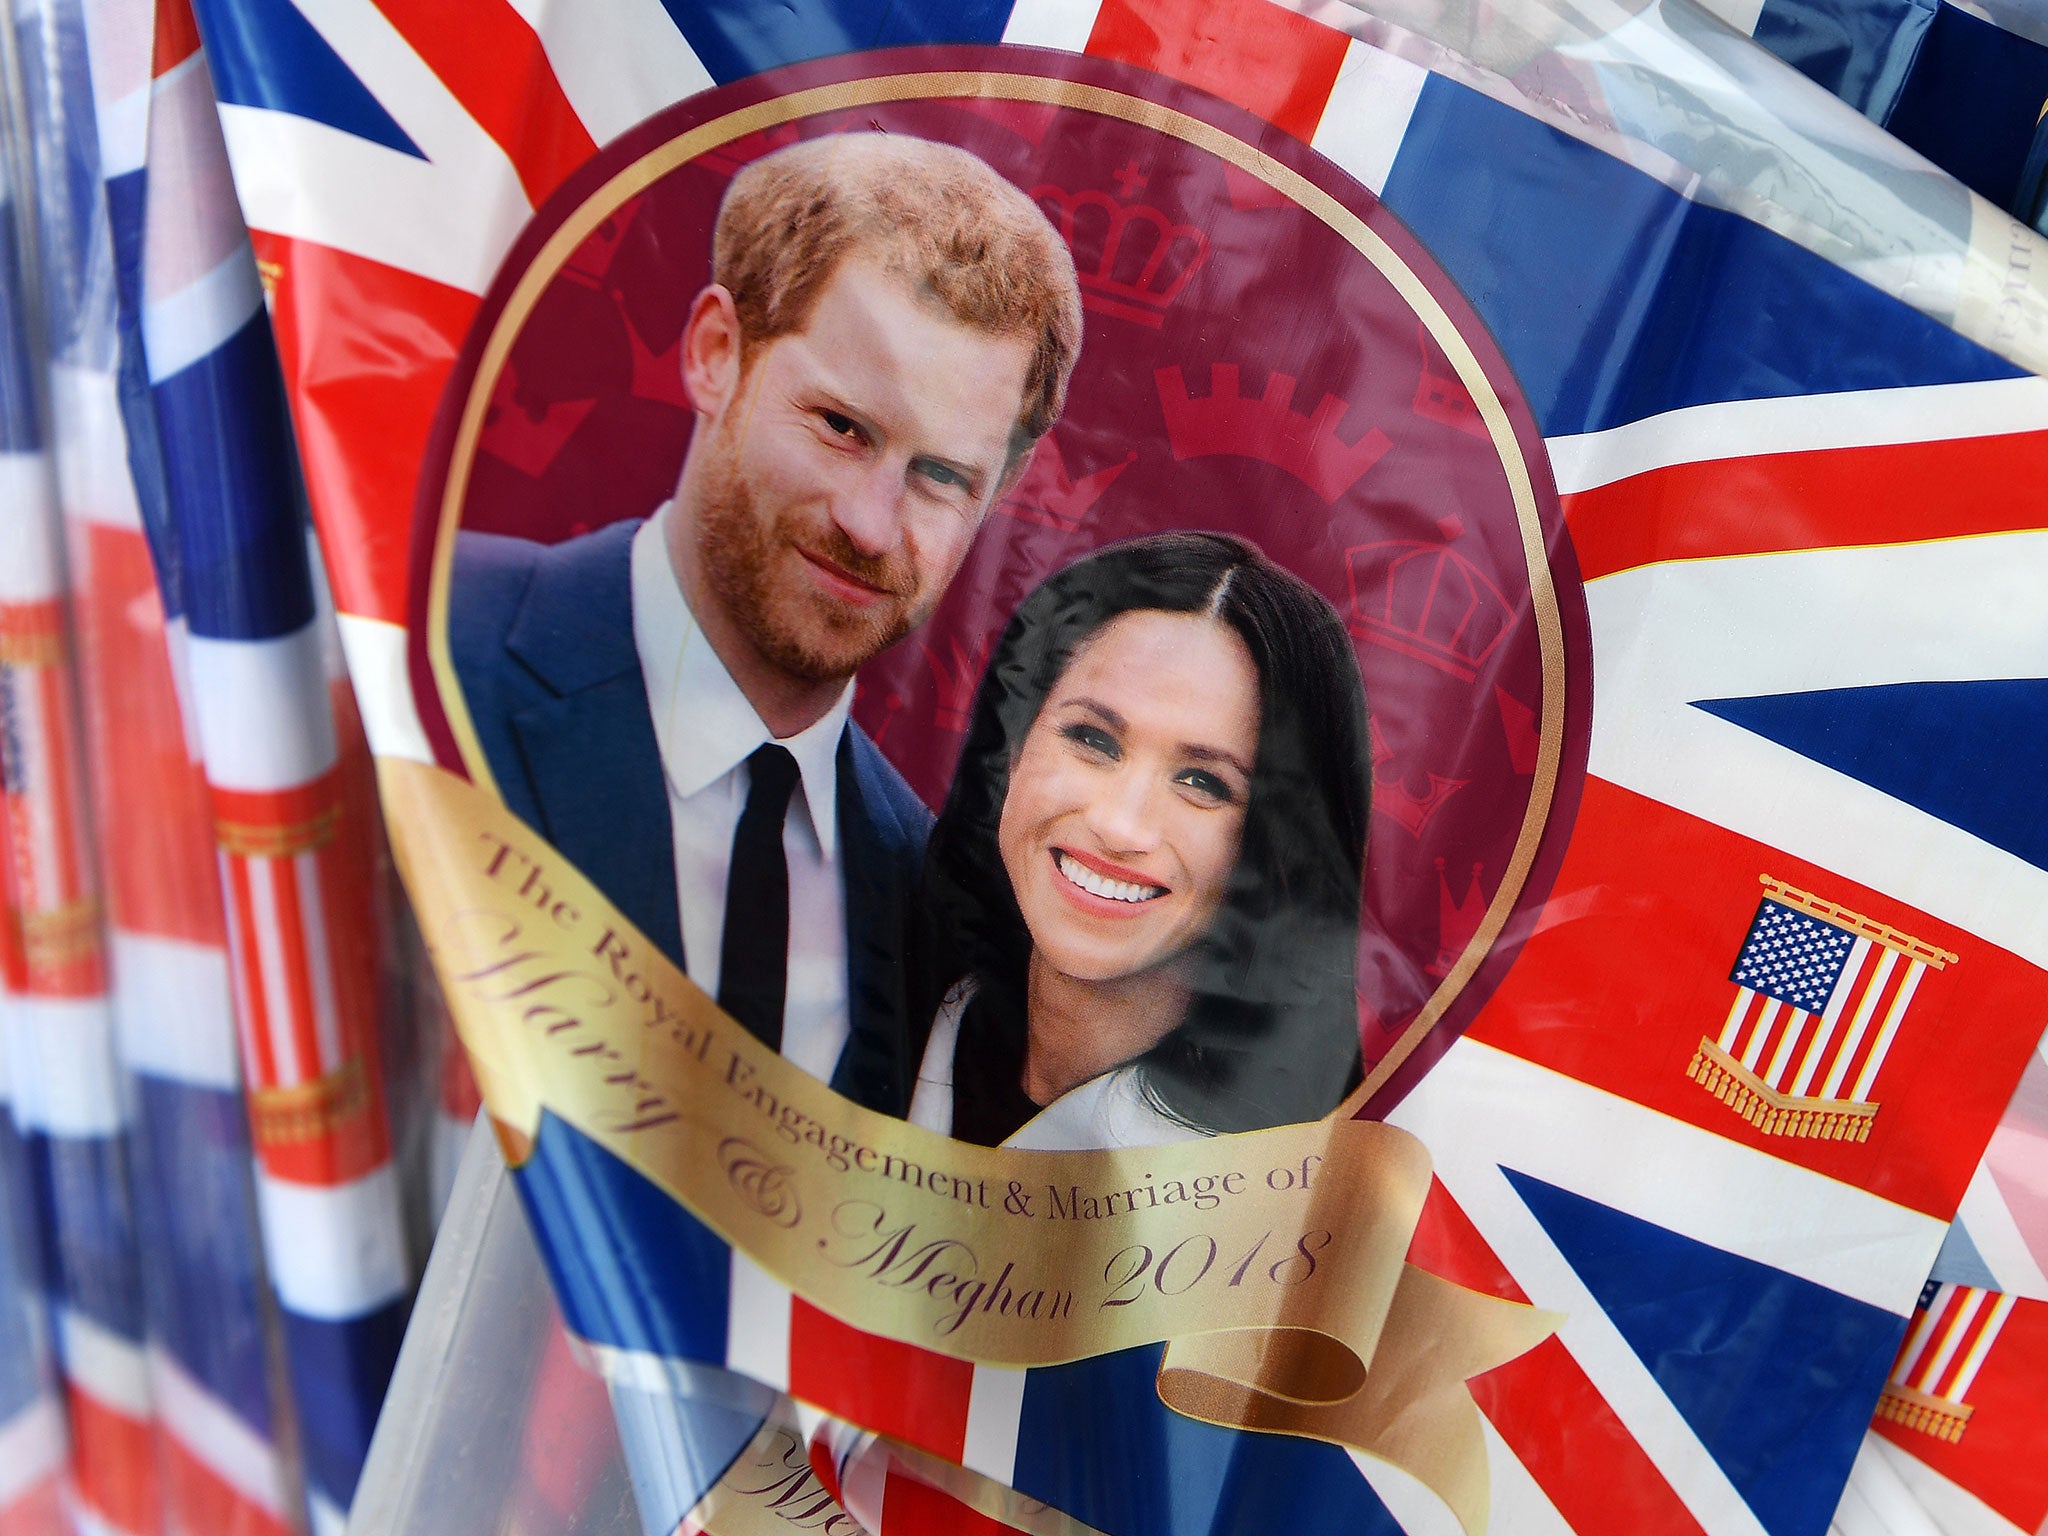 Relishing in some enjoyment for a royal wedding is like an island in a storm of terrible news